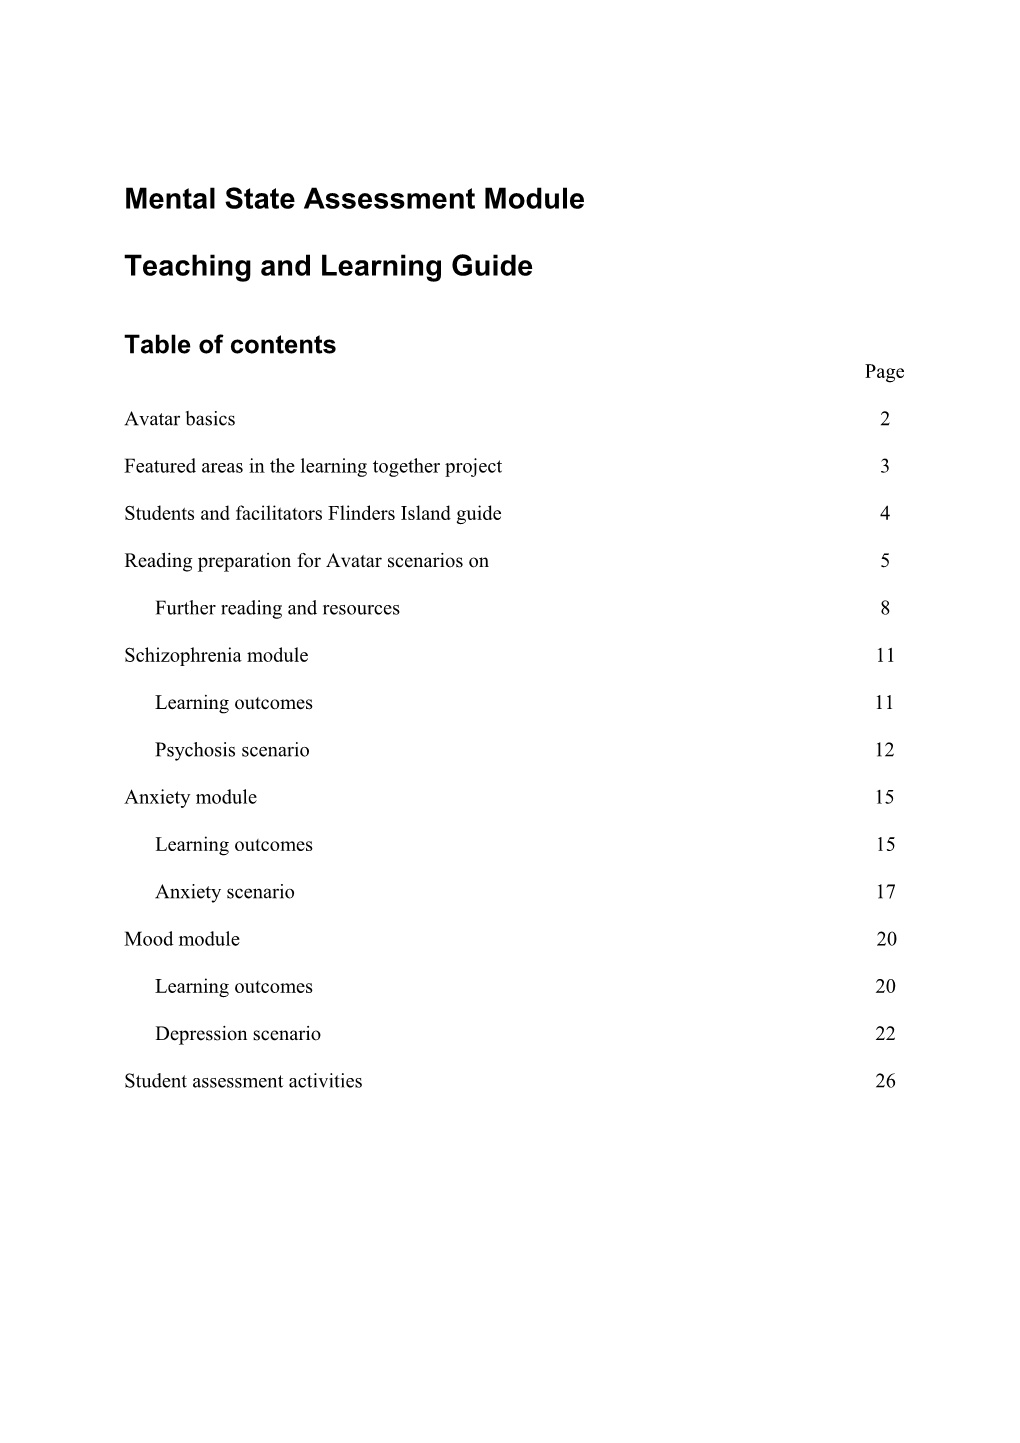 Teaching and Learning Guide